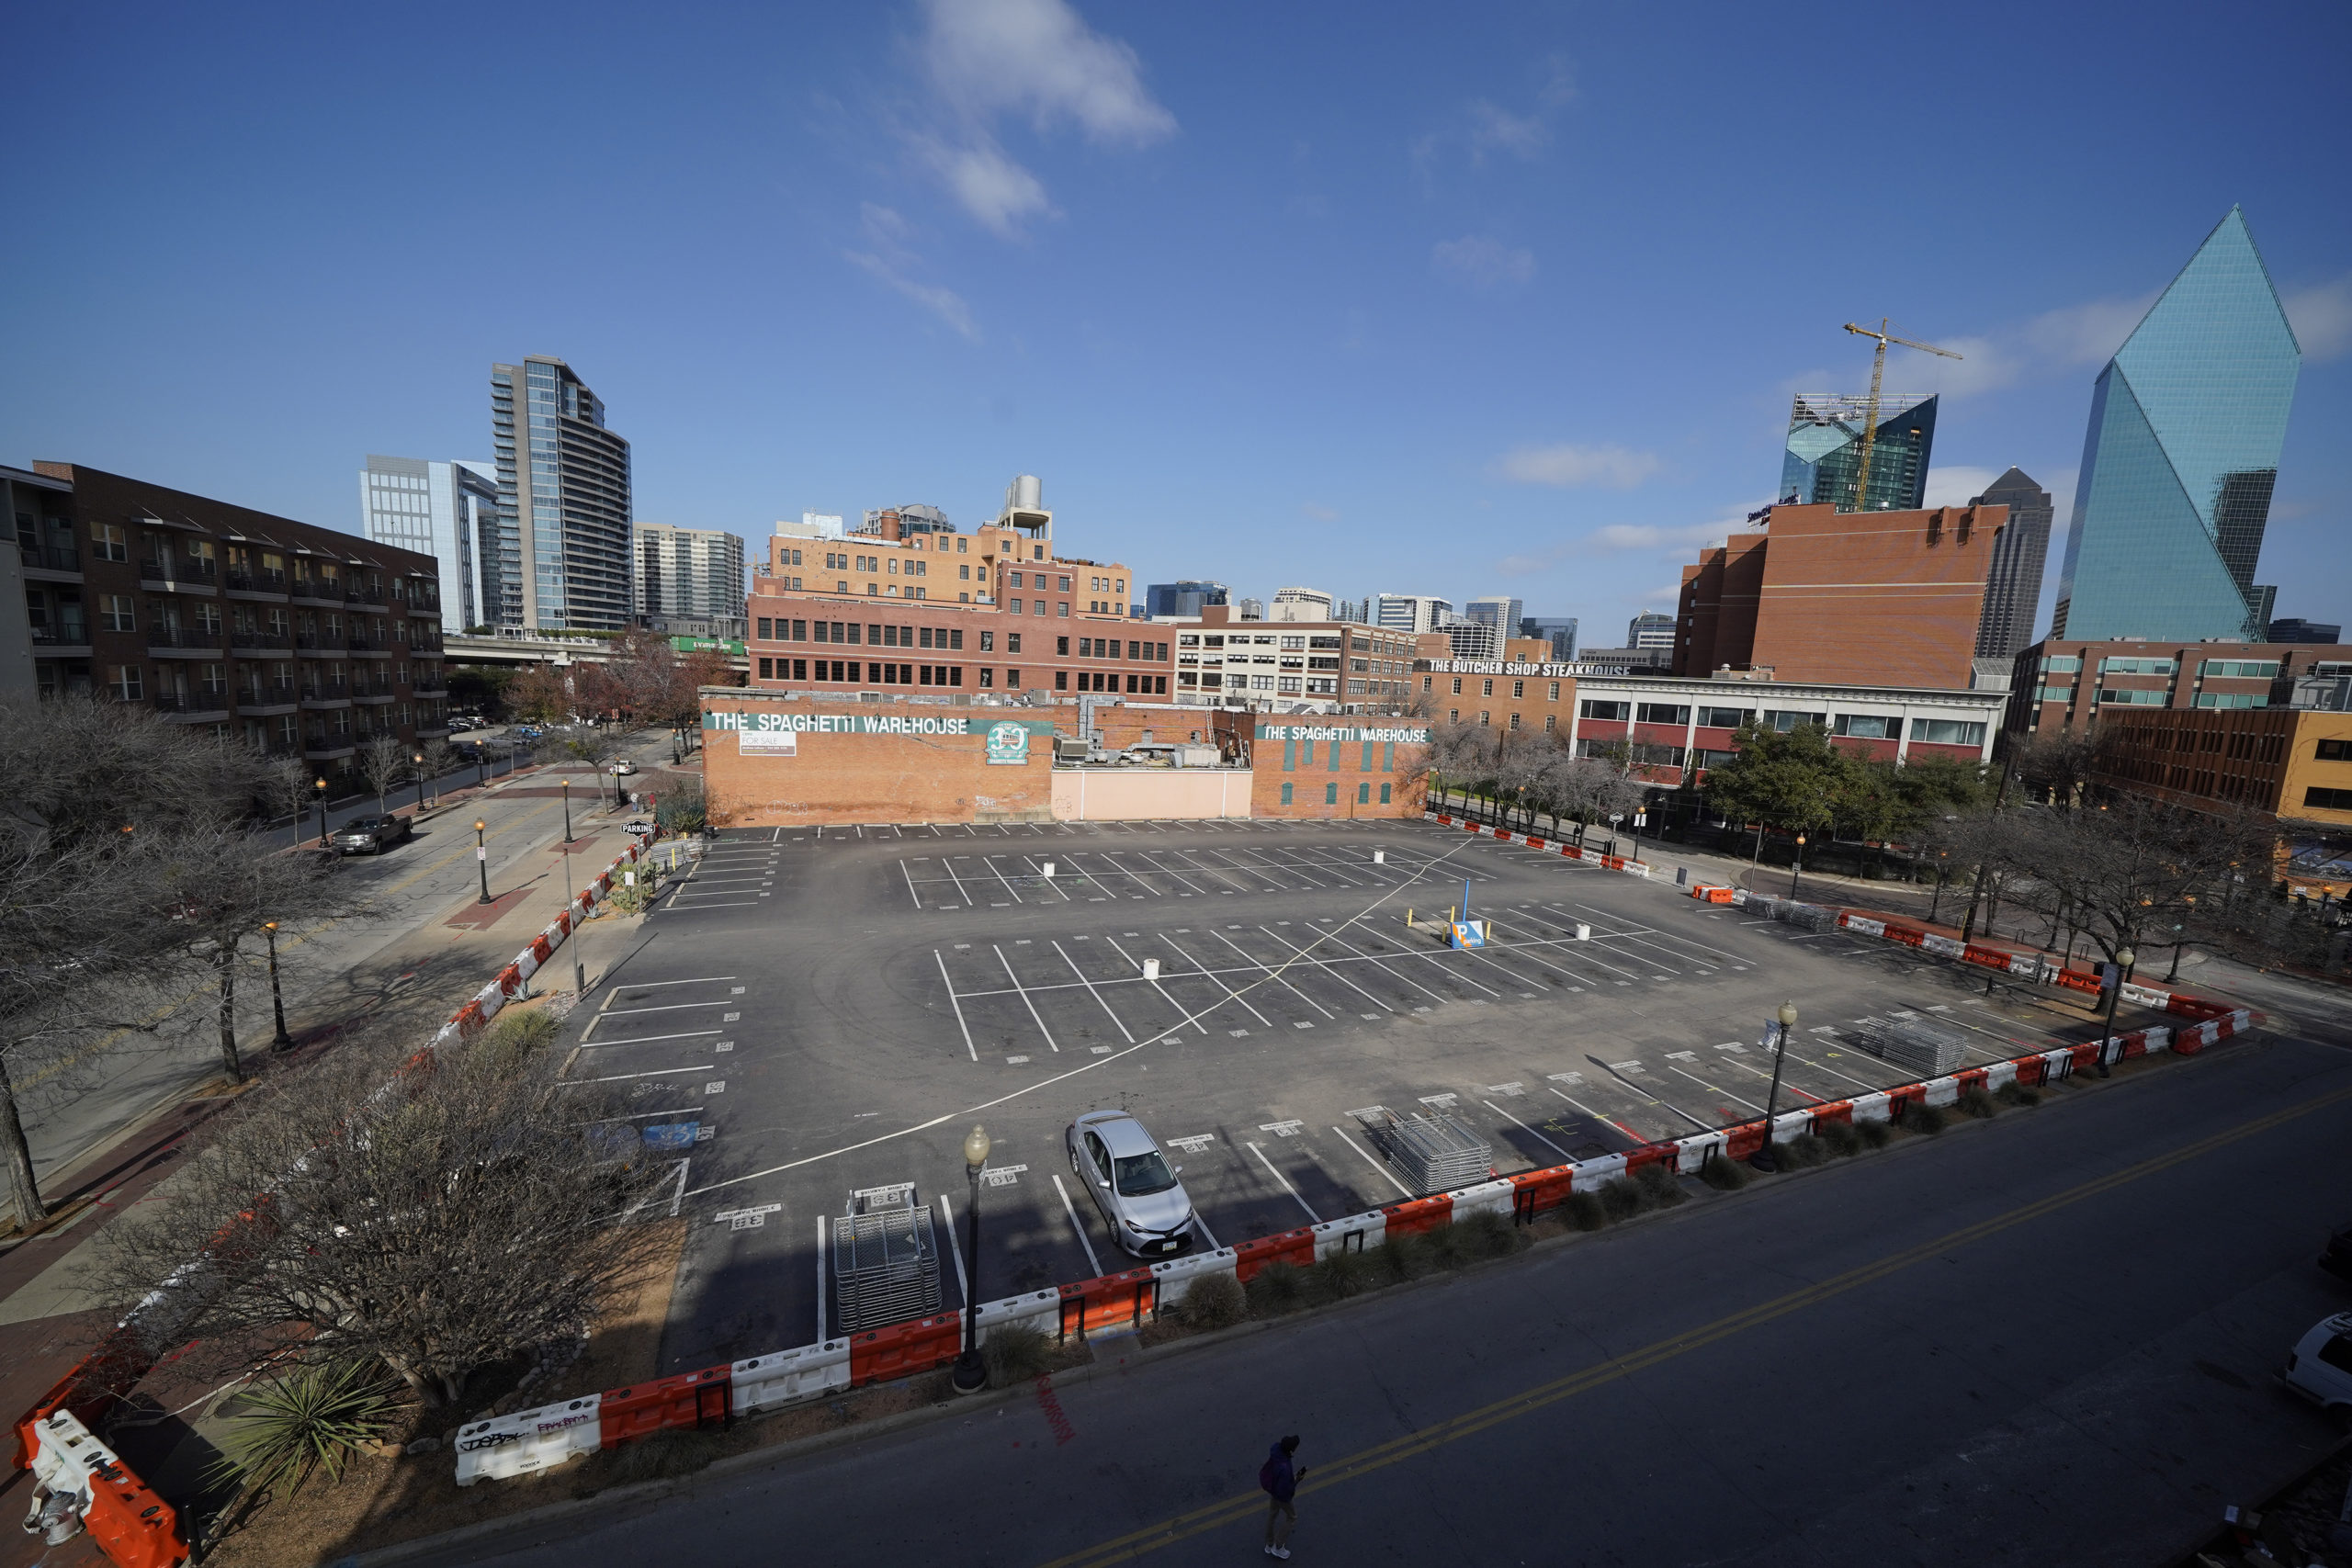 Replacing Parking with People: The Next Wave of Adaptive Reuse